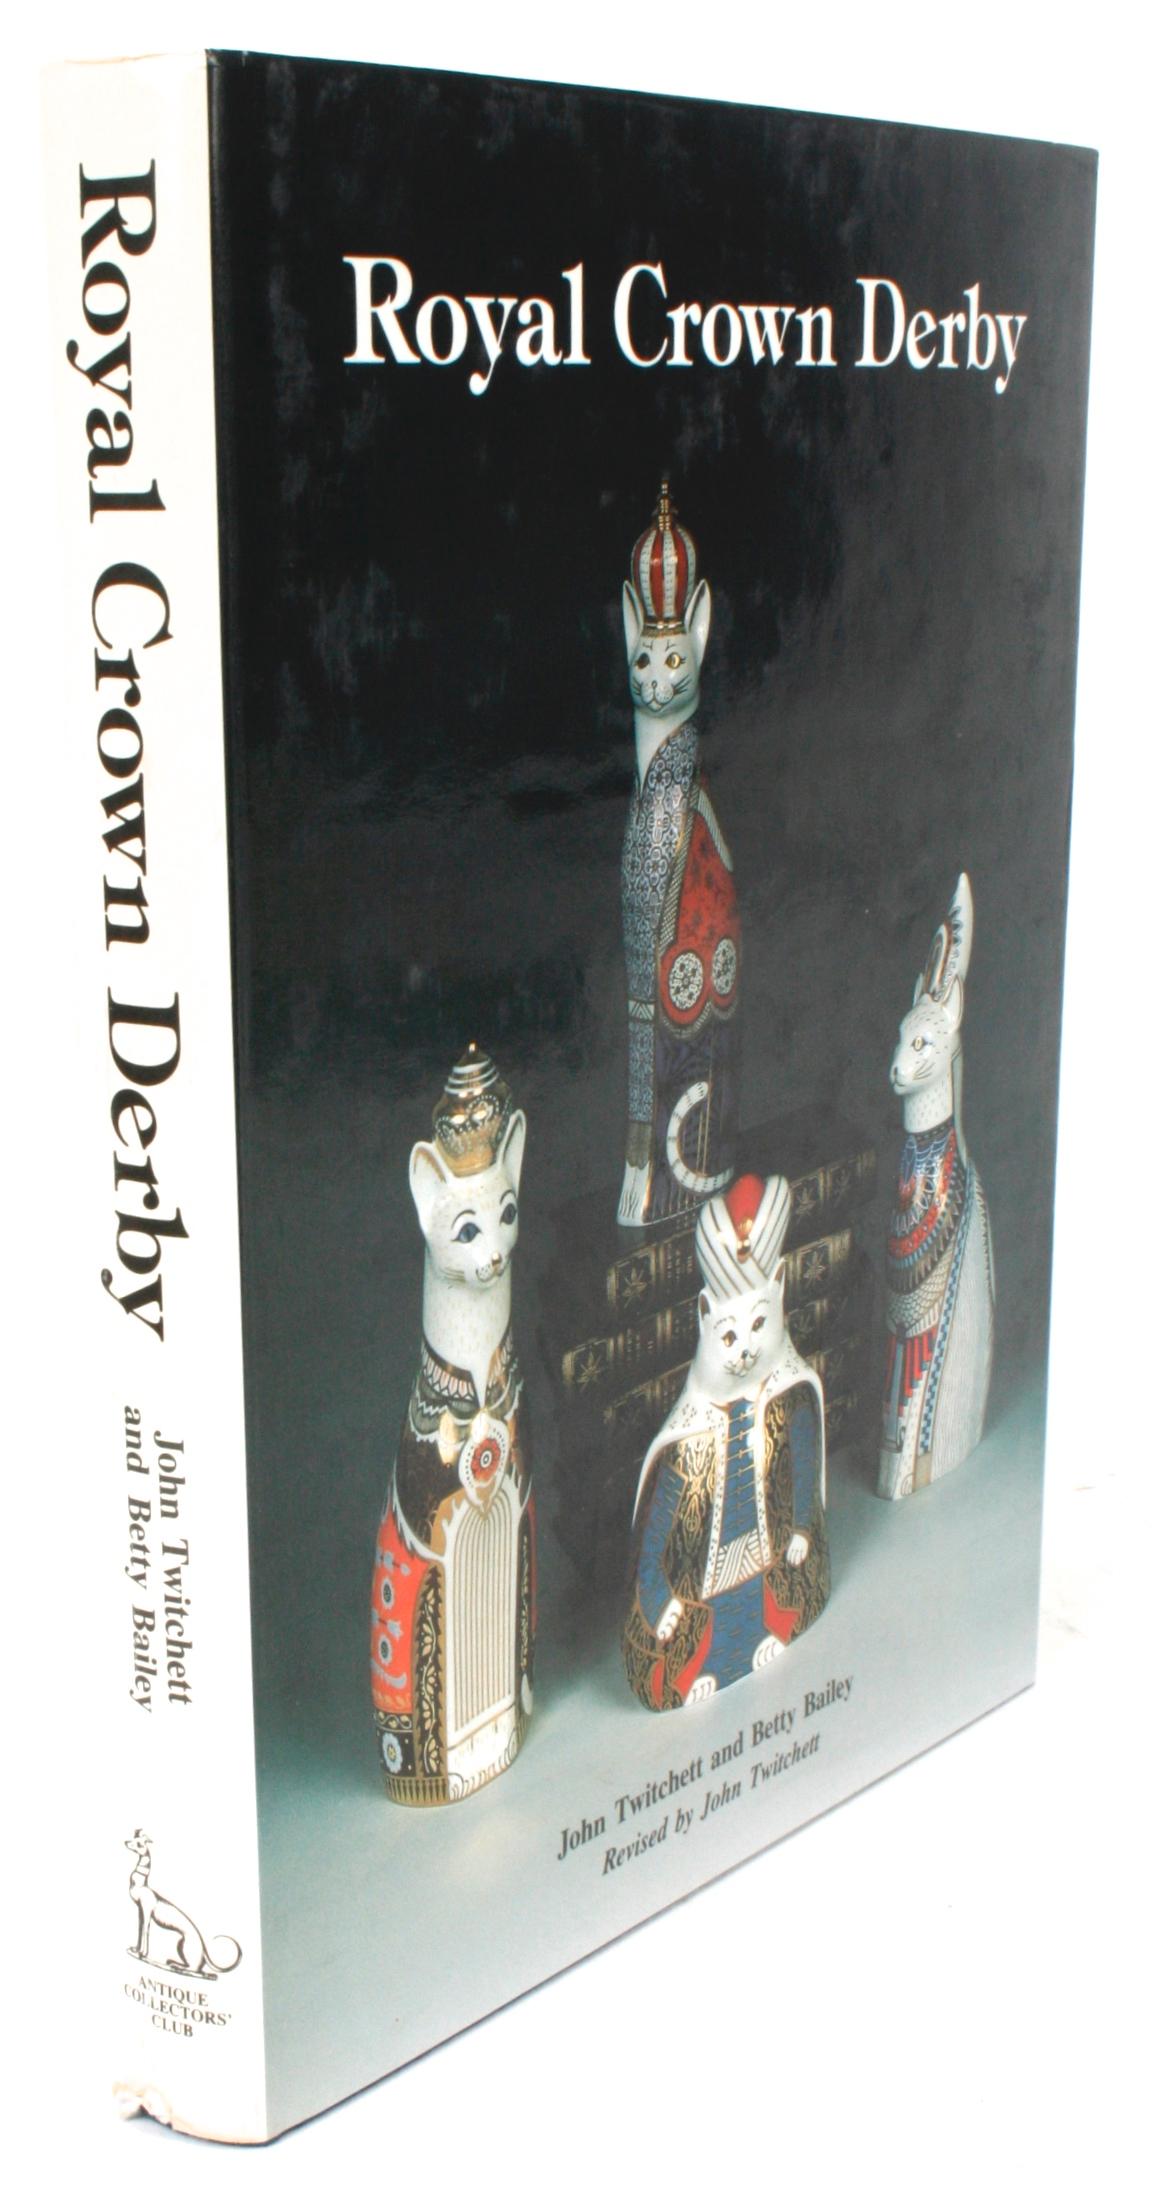 Royal Crown Derby by John Twitchett and Betty Bailey. Woodbridge: Antique Collectors' Club, 1988. Hardcover with dust jacket. 272 pp. The Royal Crown Derby Porcelain Company is the oldest remaining English porcelain manufacturer, based in Derby,